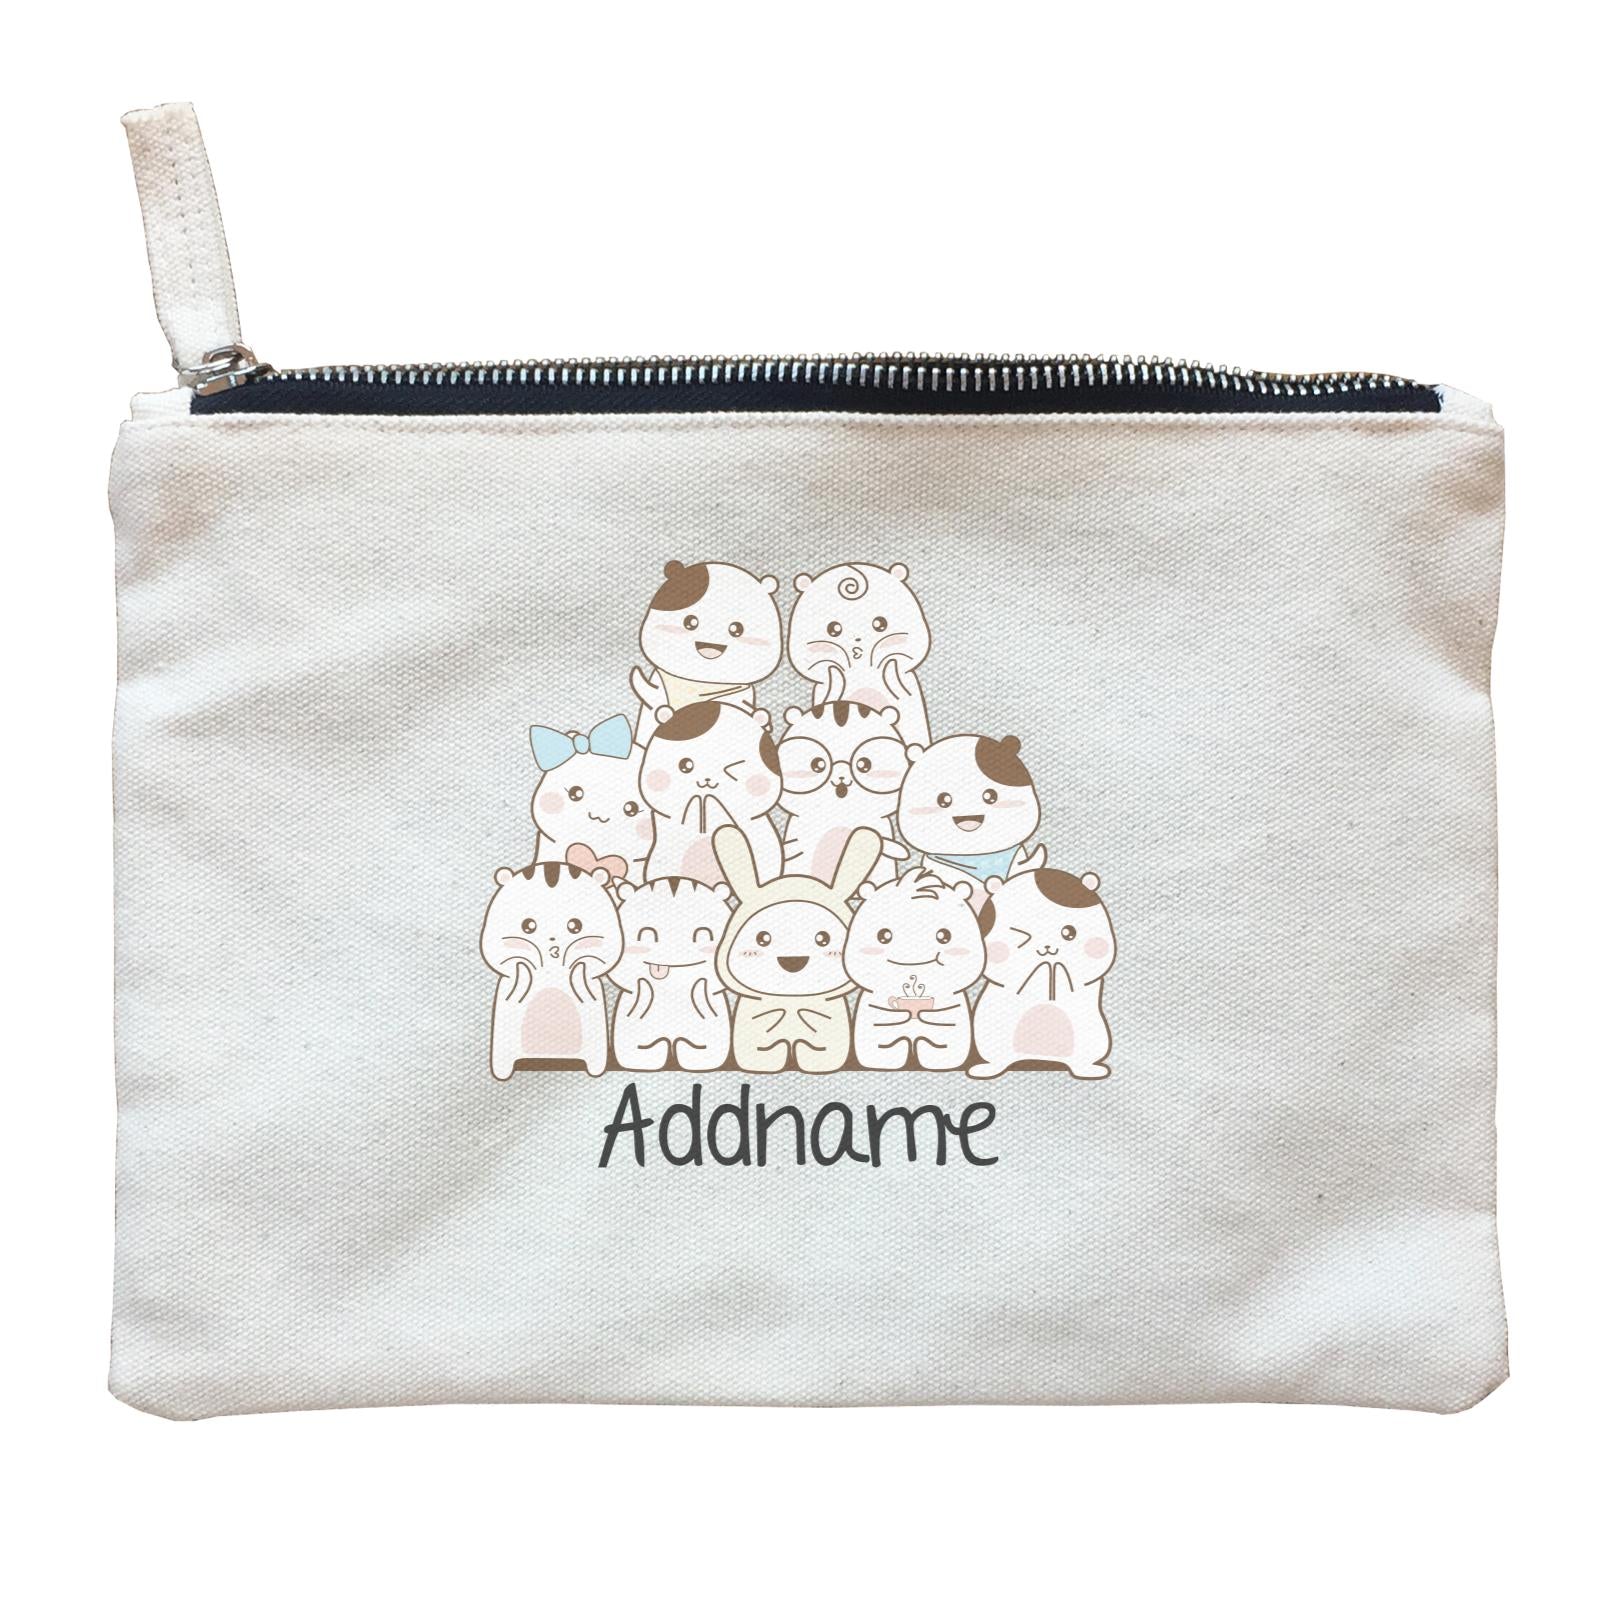 Cute Animals And Friends Series Cute Hamster Group Addname Zipper Pouch